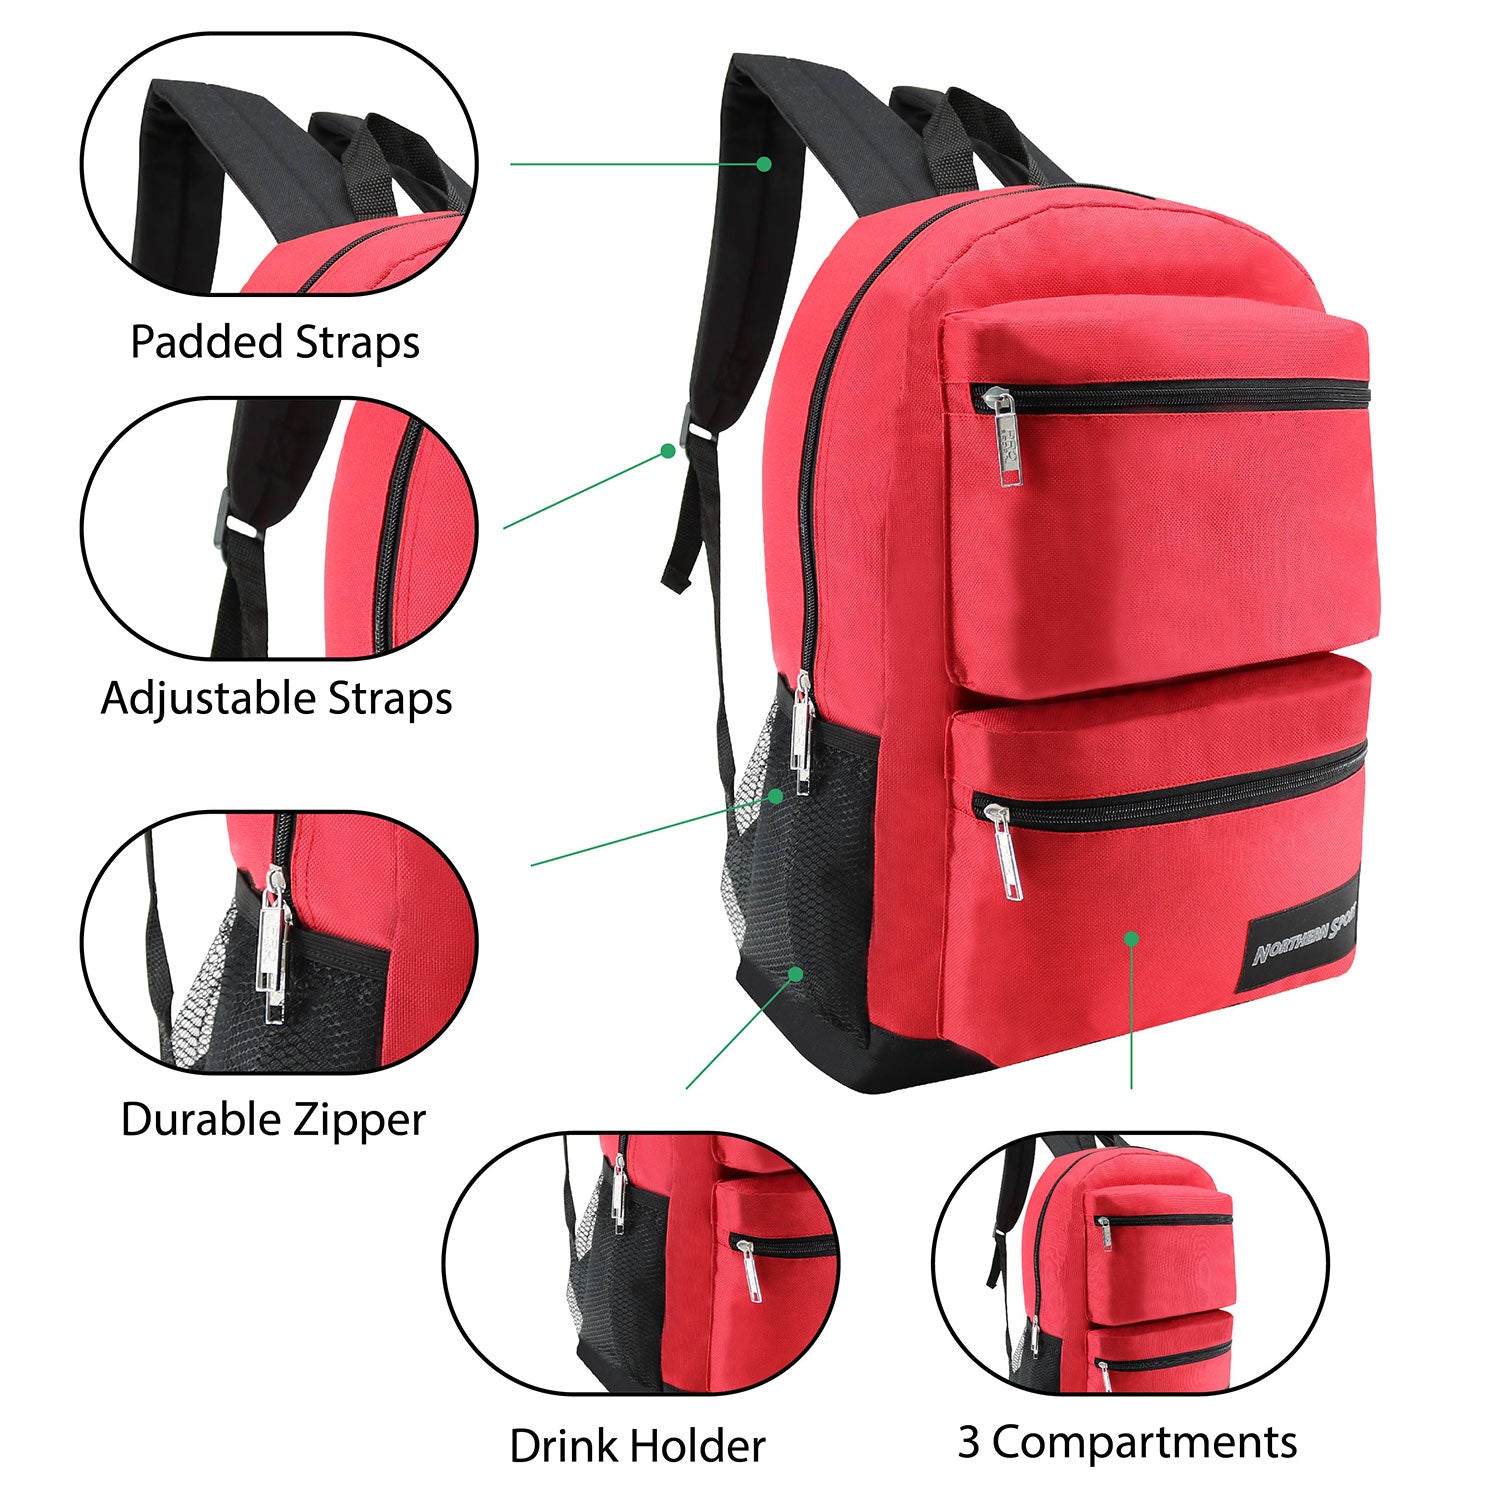 Bulk Case of 12 19" Backpacks and 12 Hygiene / Toiletries Kit - Wholesale Care Package - Disaster Relief Kit, Homeless, Charity